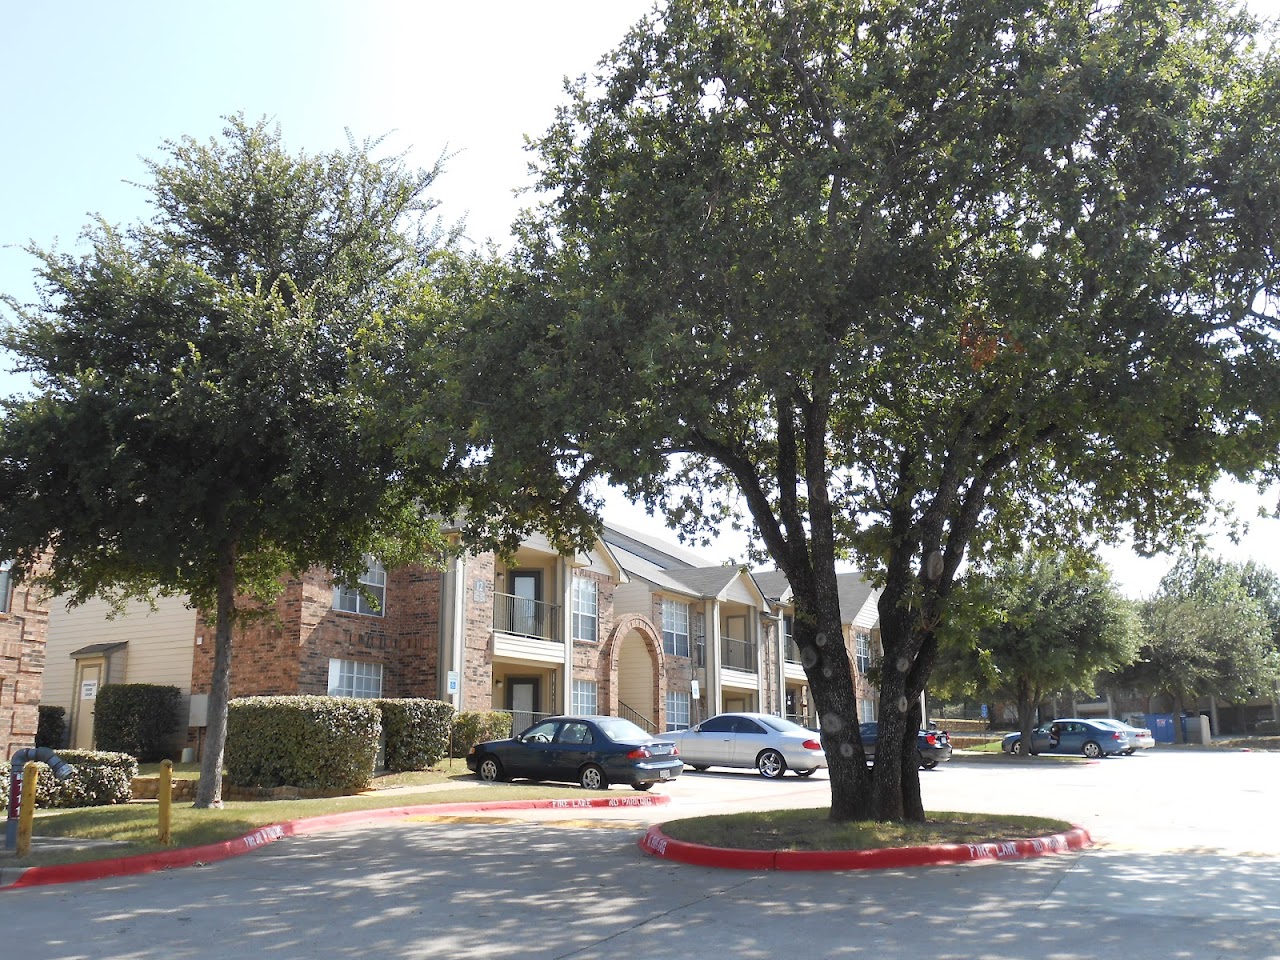 Photo of ASH PARK APTS. Affordable housing located at 601 E ASH LN EULESS, TX 76039